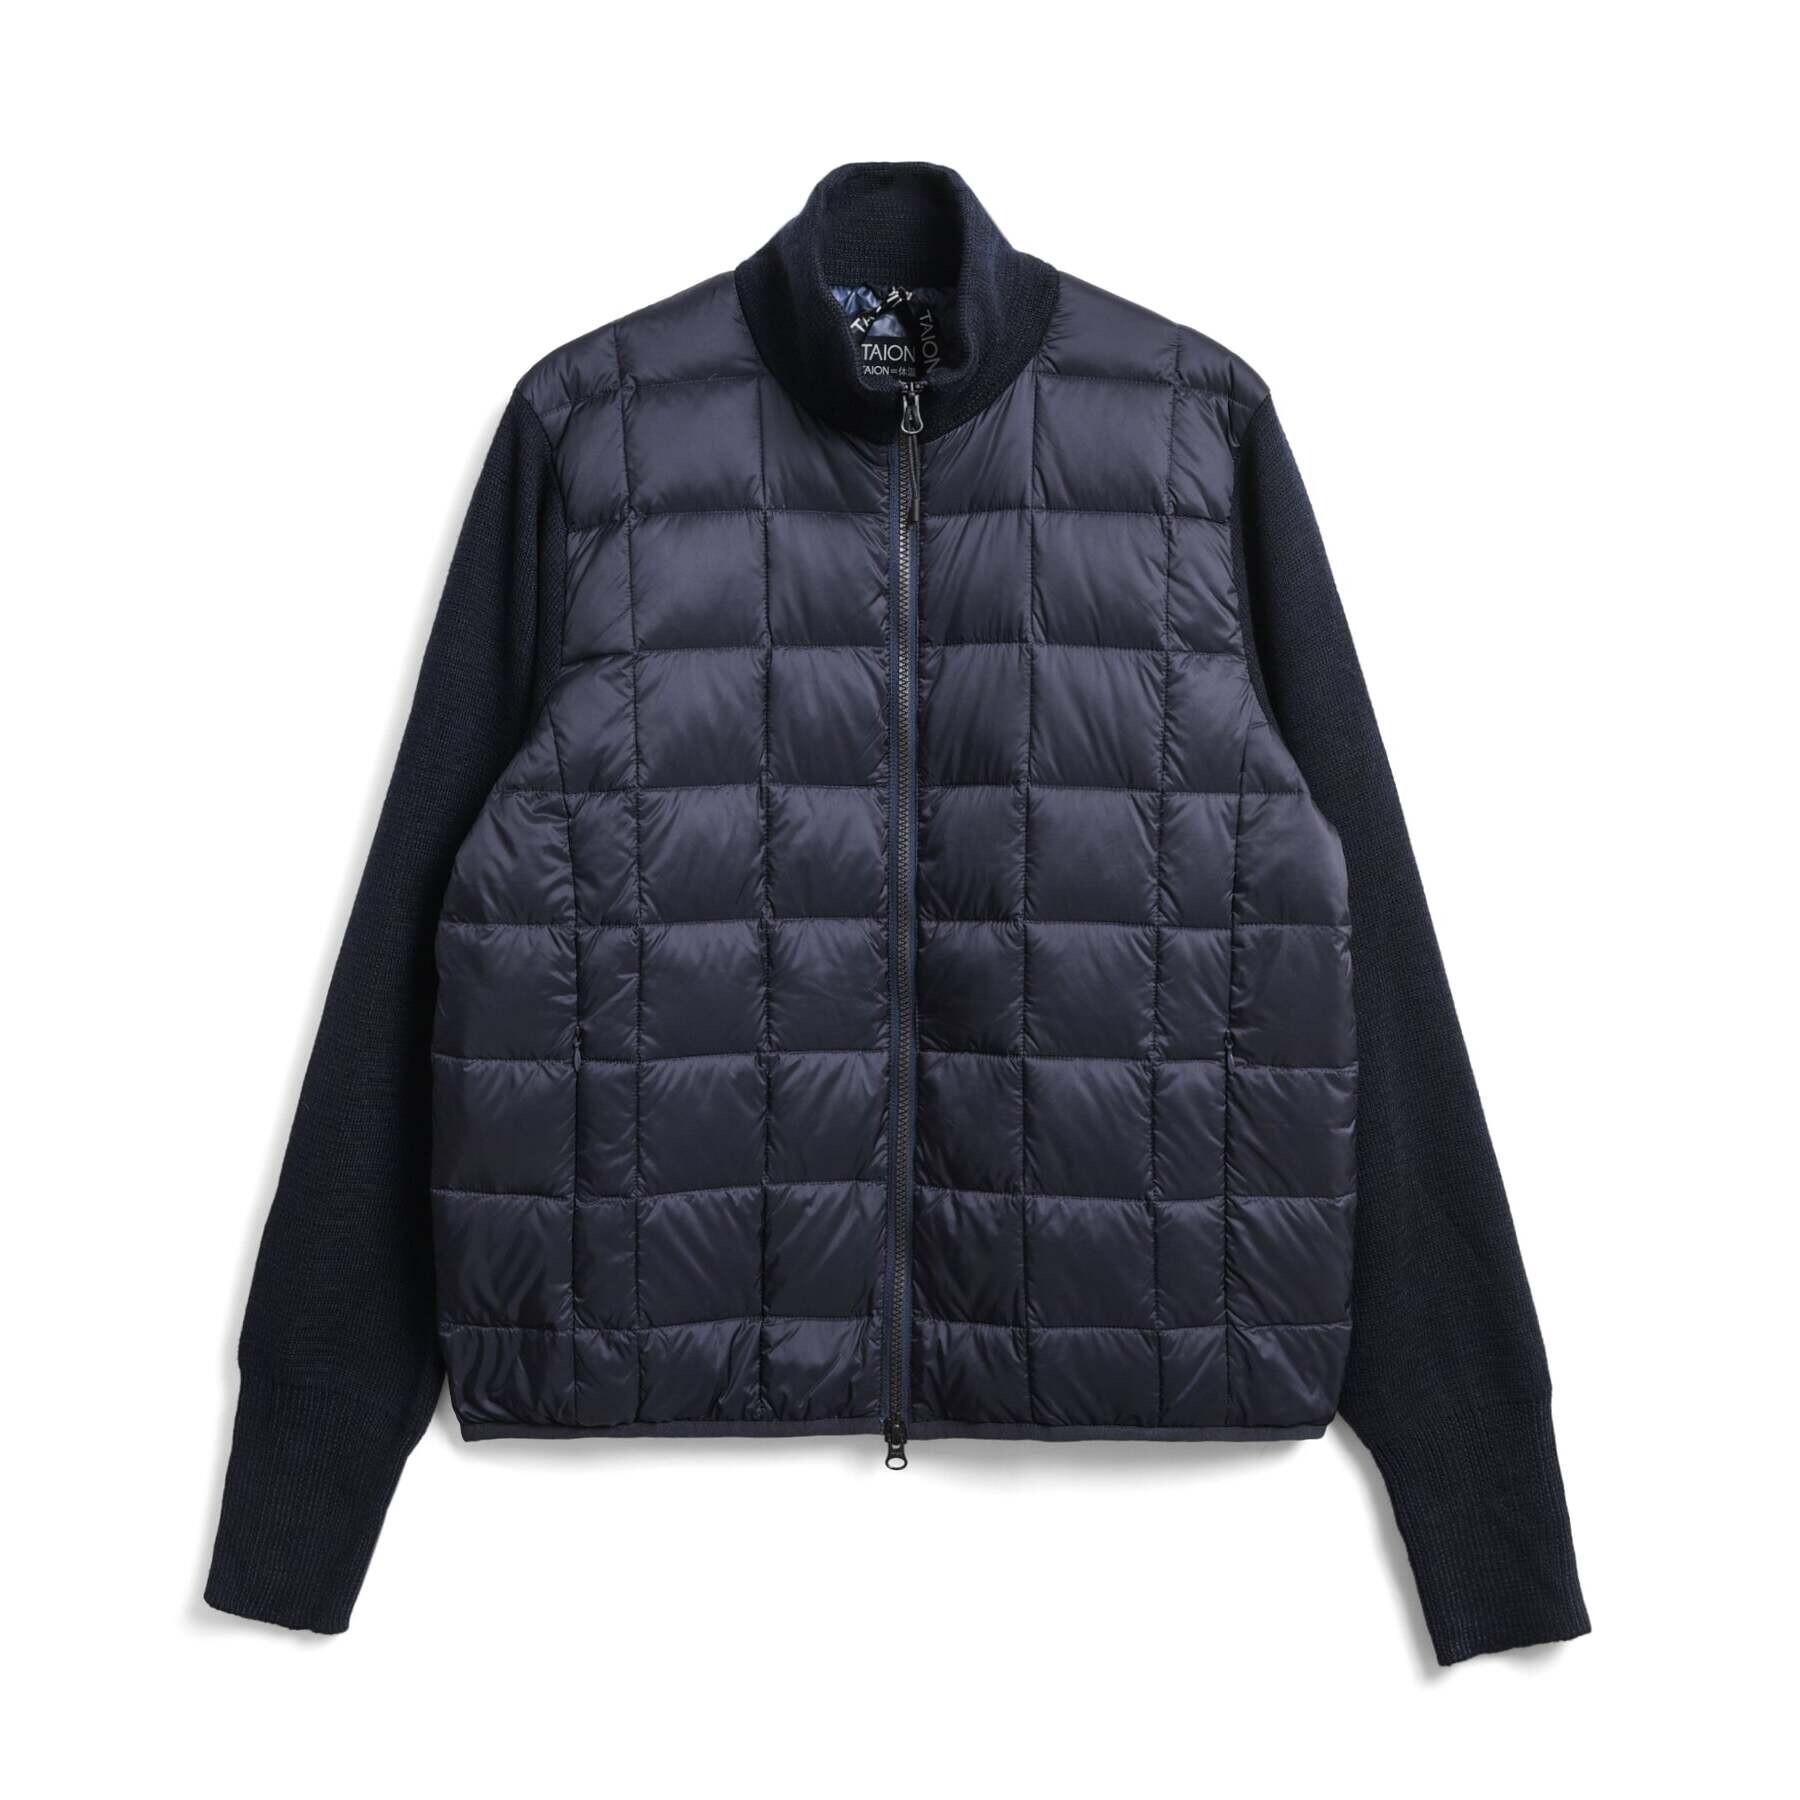 BasicPuffer Jacket with high collar and knitted zip-off sleeves Taion